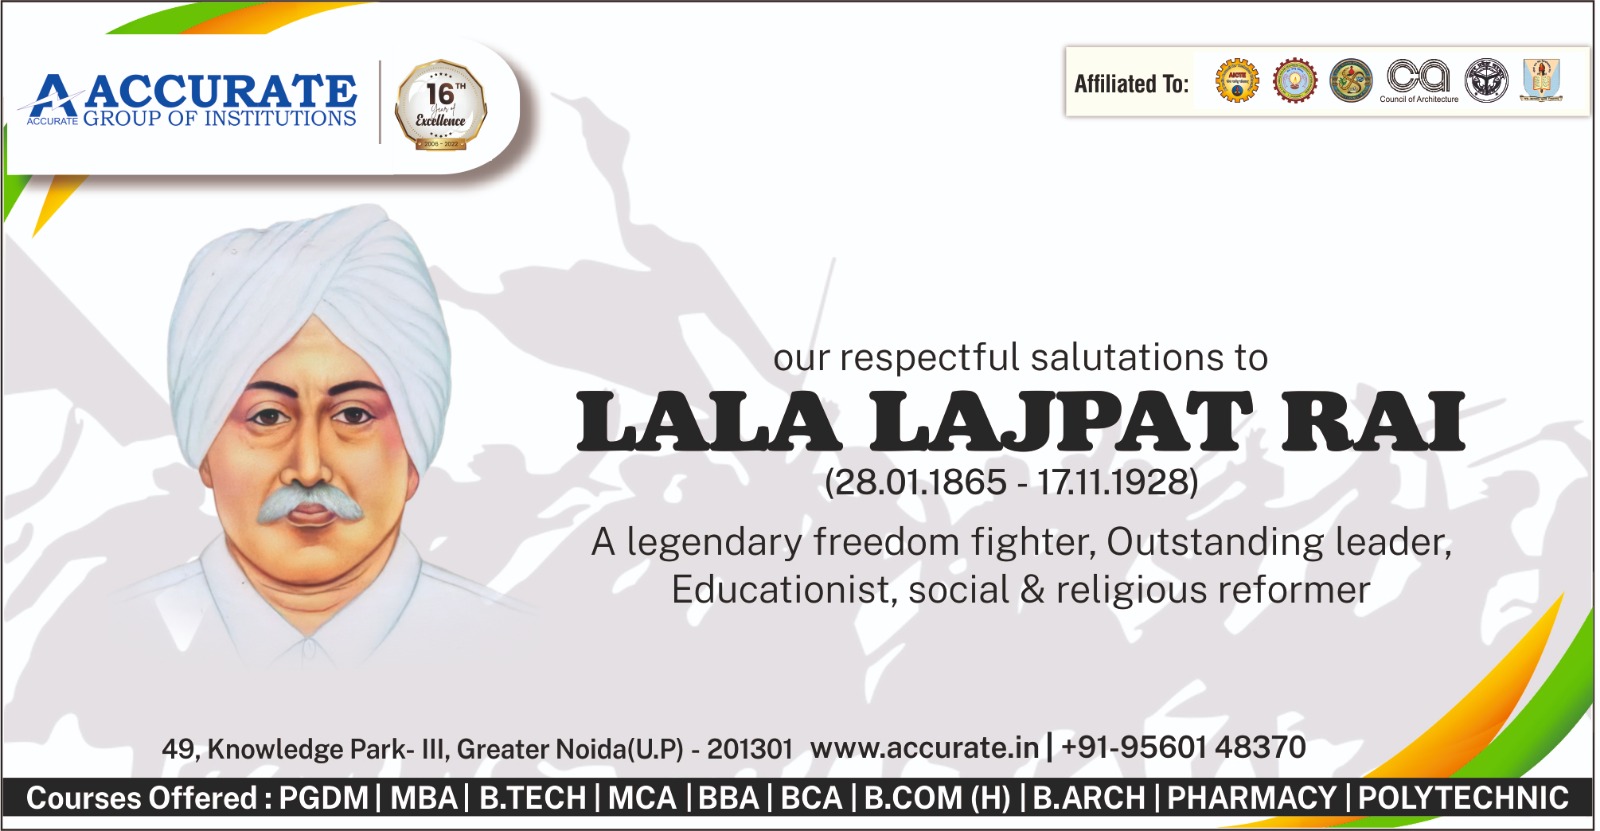 A legendary freedom fighter, Outstanding leader